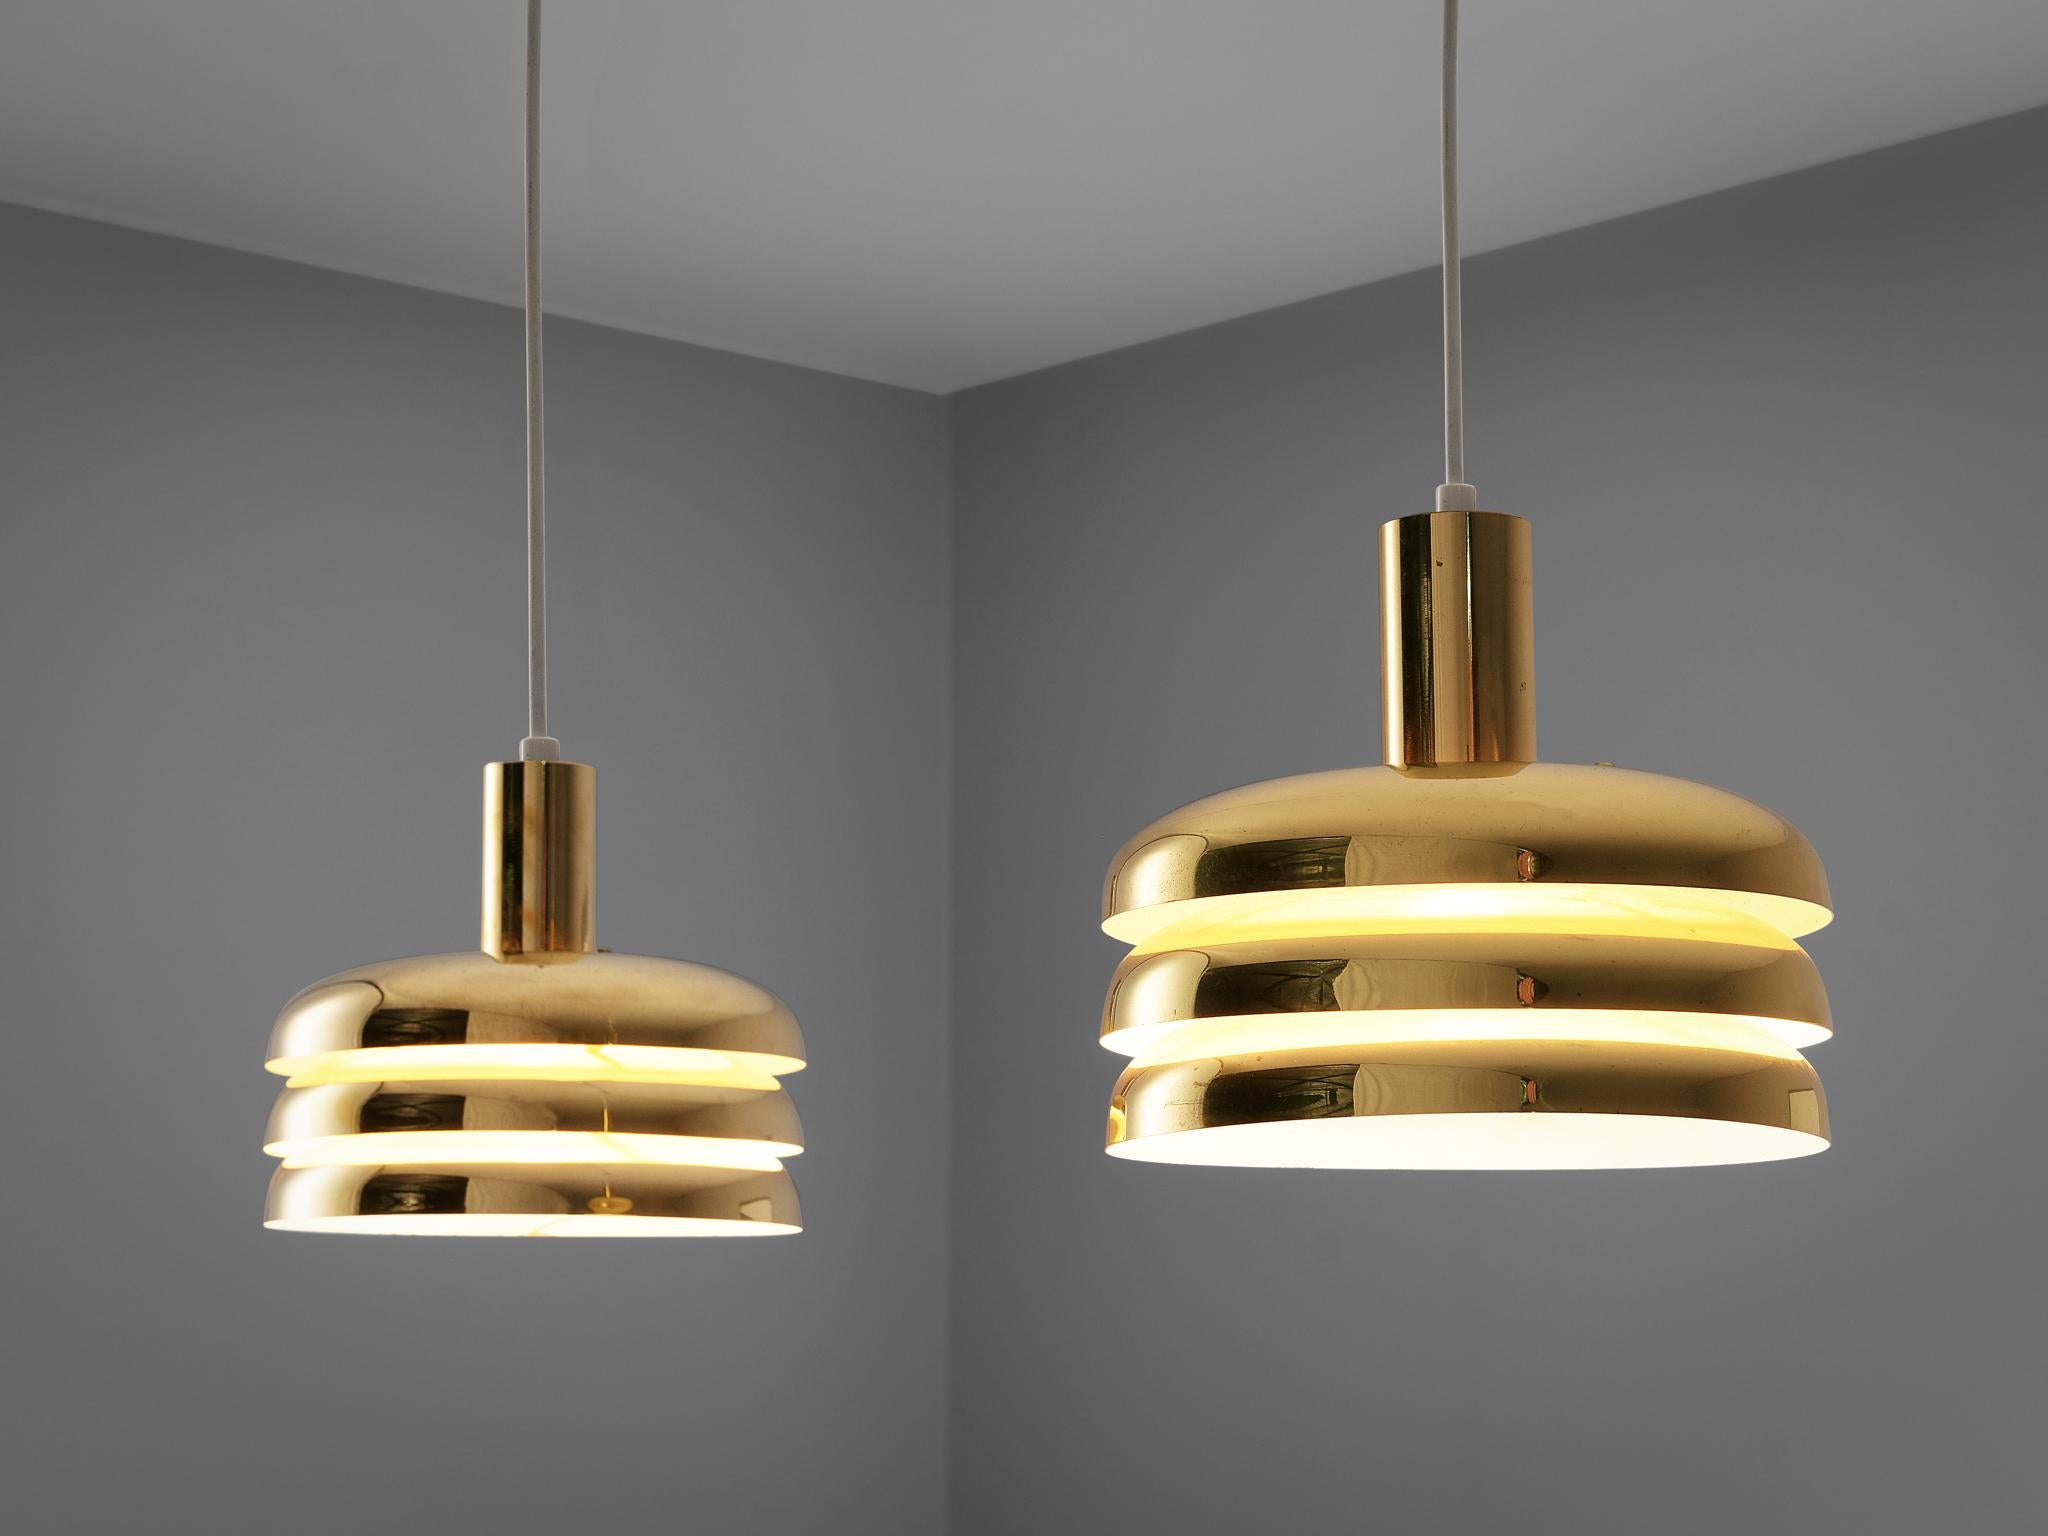 Hans-Agne Jakobsson, 'T-724' Lamingo ceiling lights, brass, Sweden, 1960s.

These wonderful 'Lamingo' ceiling lamps are designed by Hans-Agne Jakobsson for or AB Markaryd. The pendants are in very good condition and have subtle patina on the brass